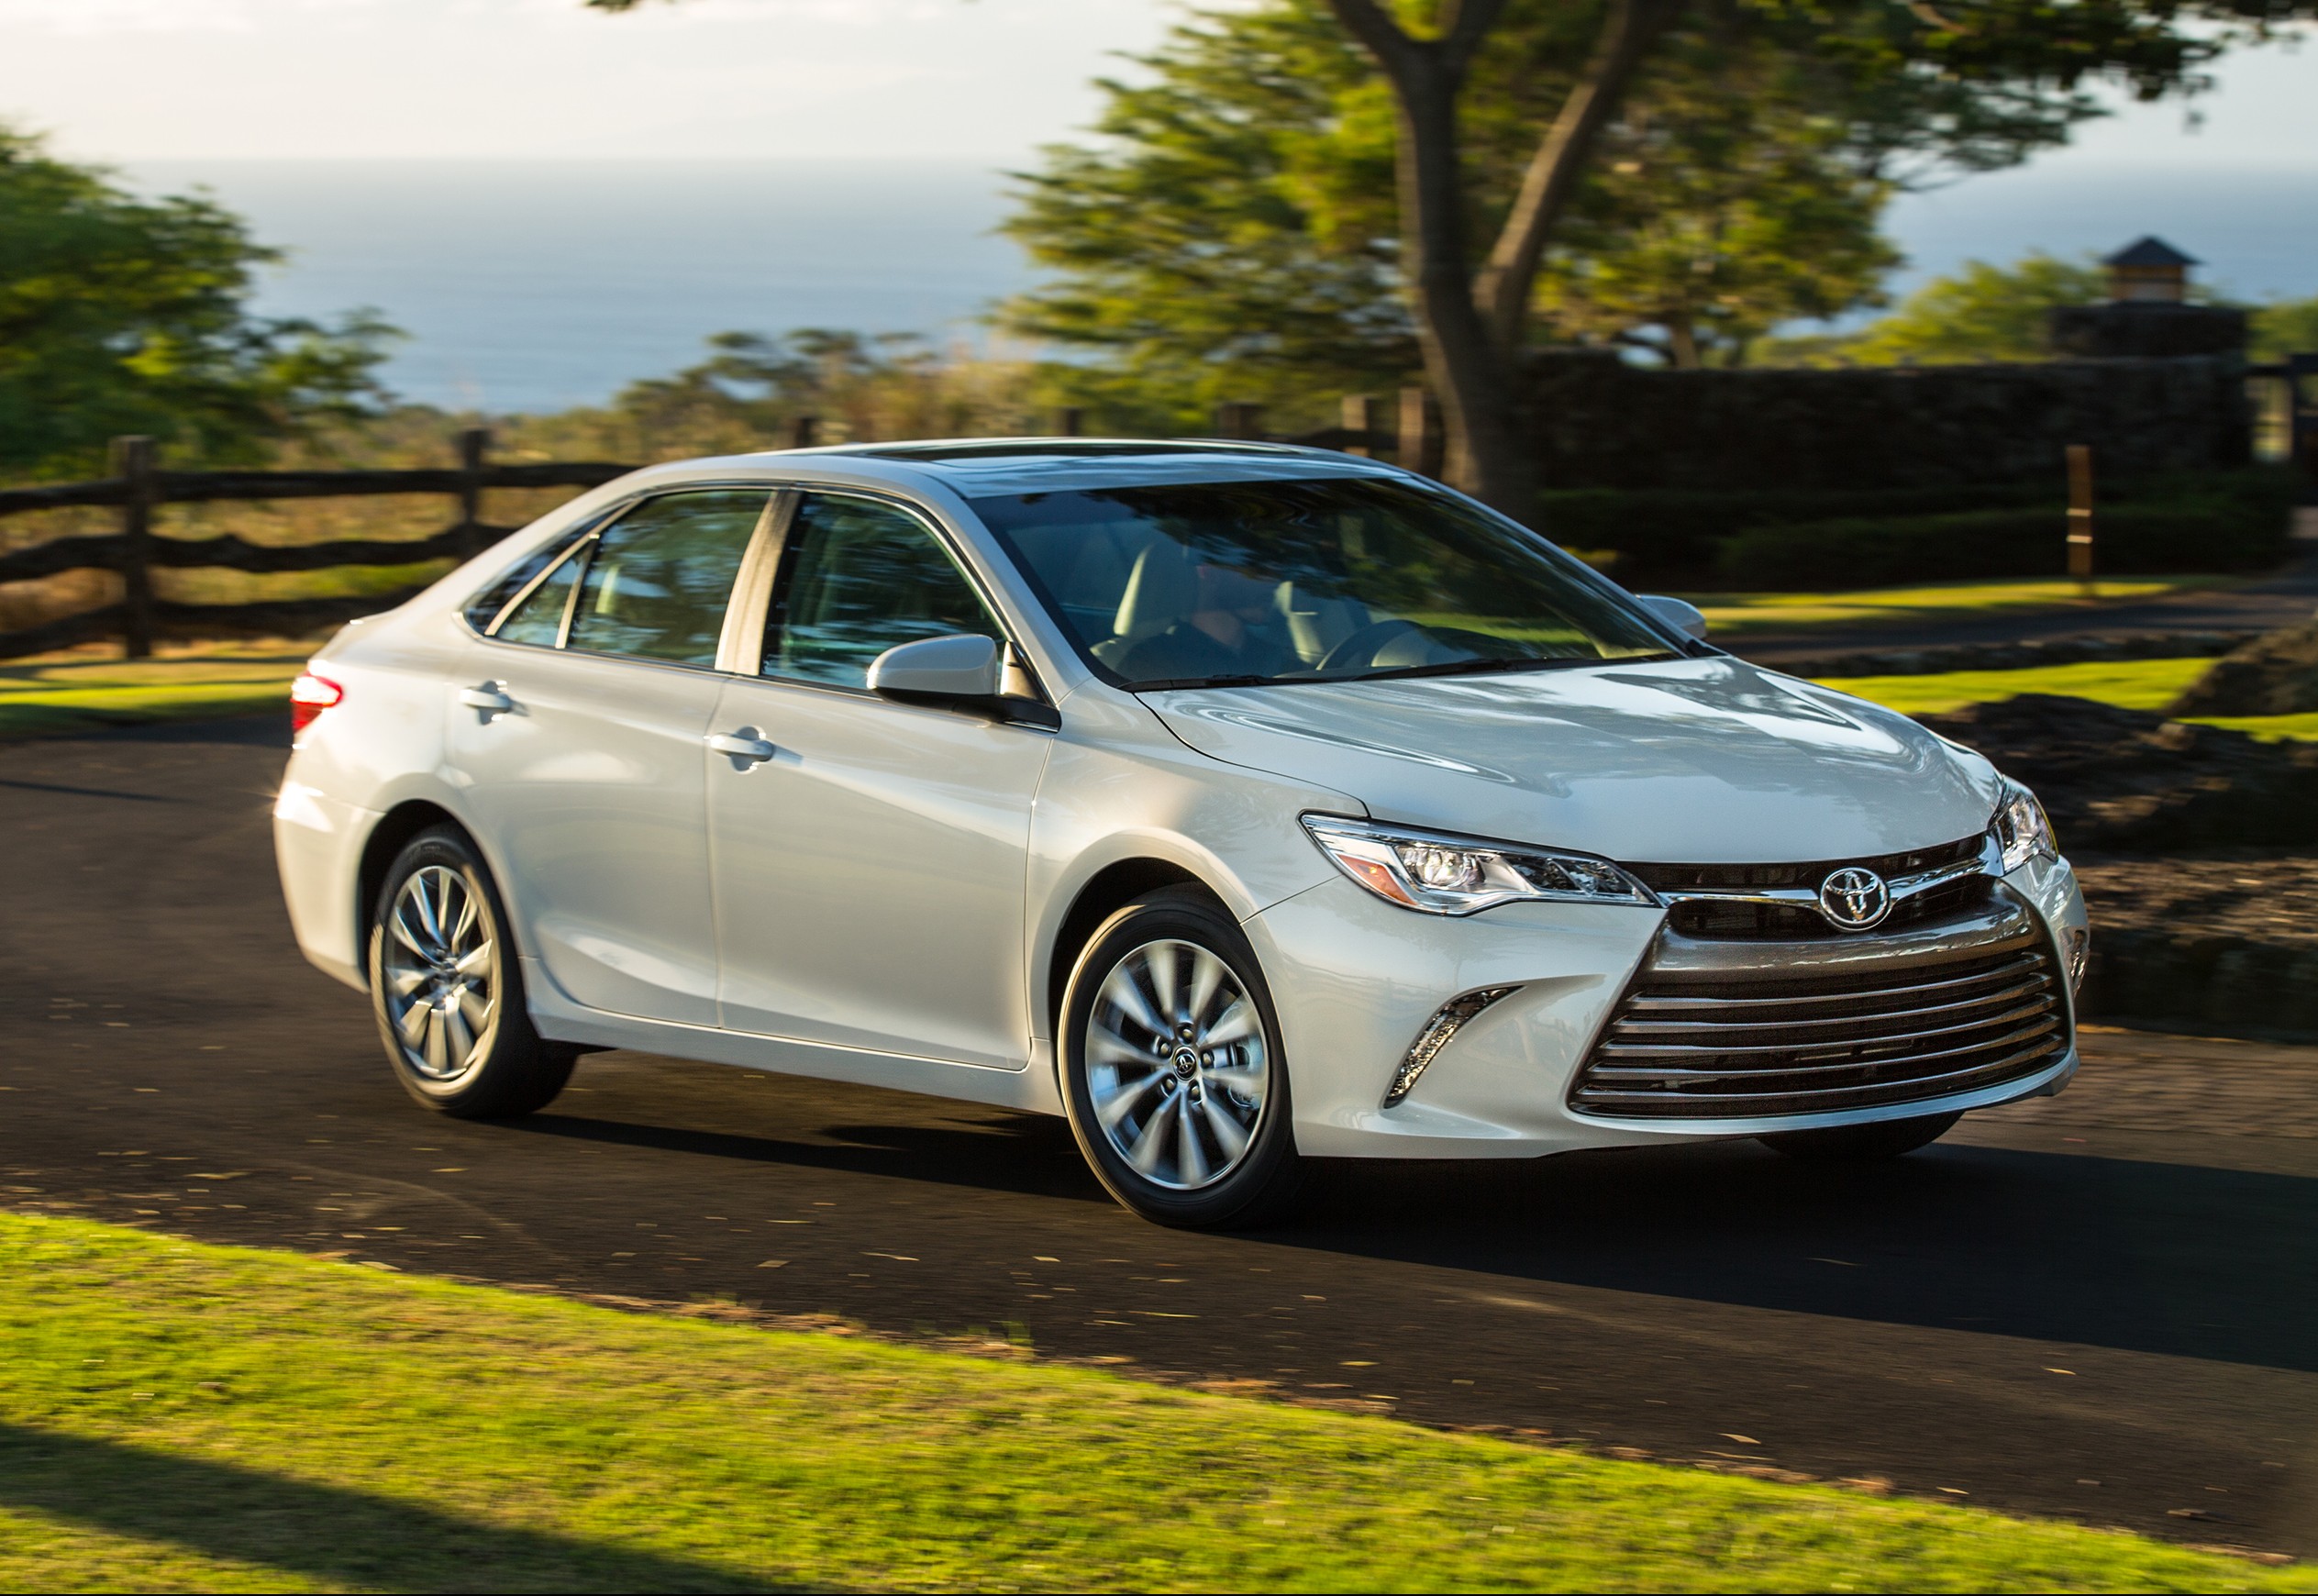 Toyota Camry XLE wallpapers, Vehicles, HQ Toyota Camry XLE pictures